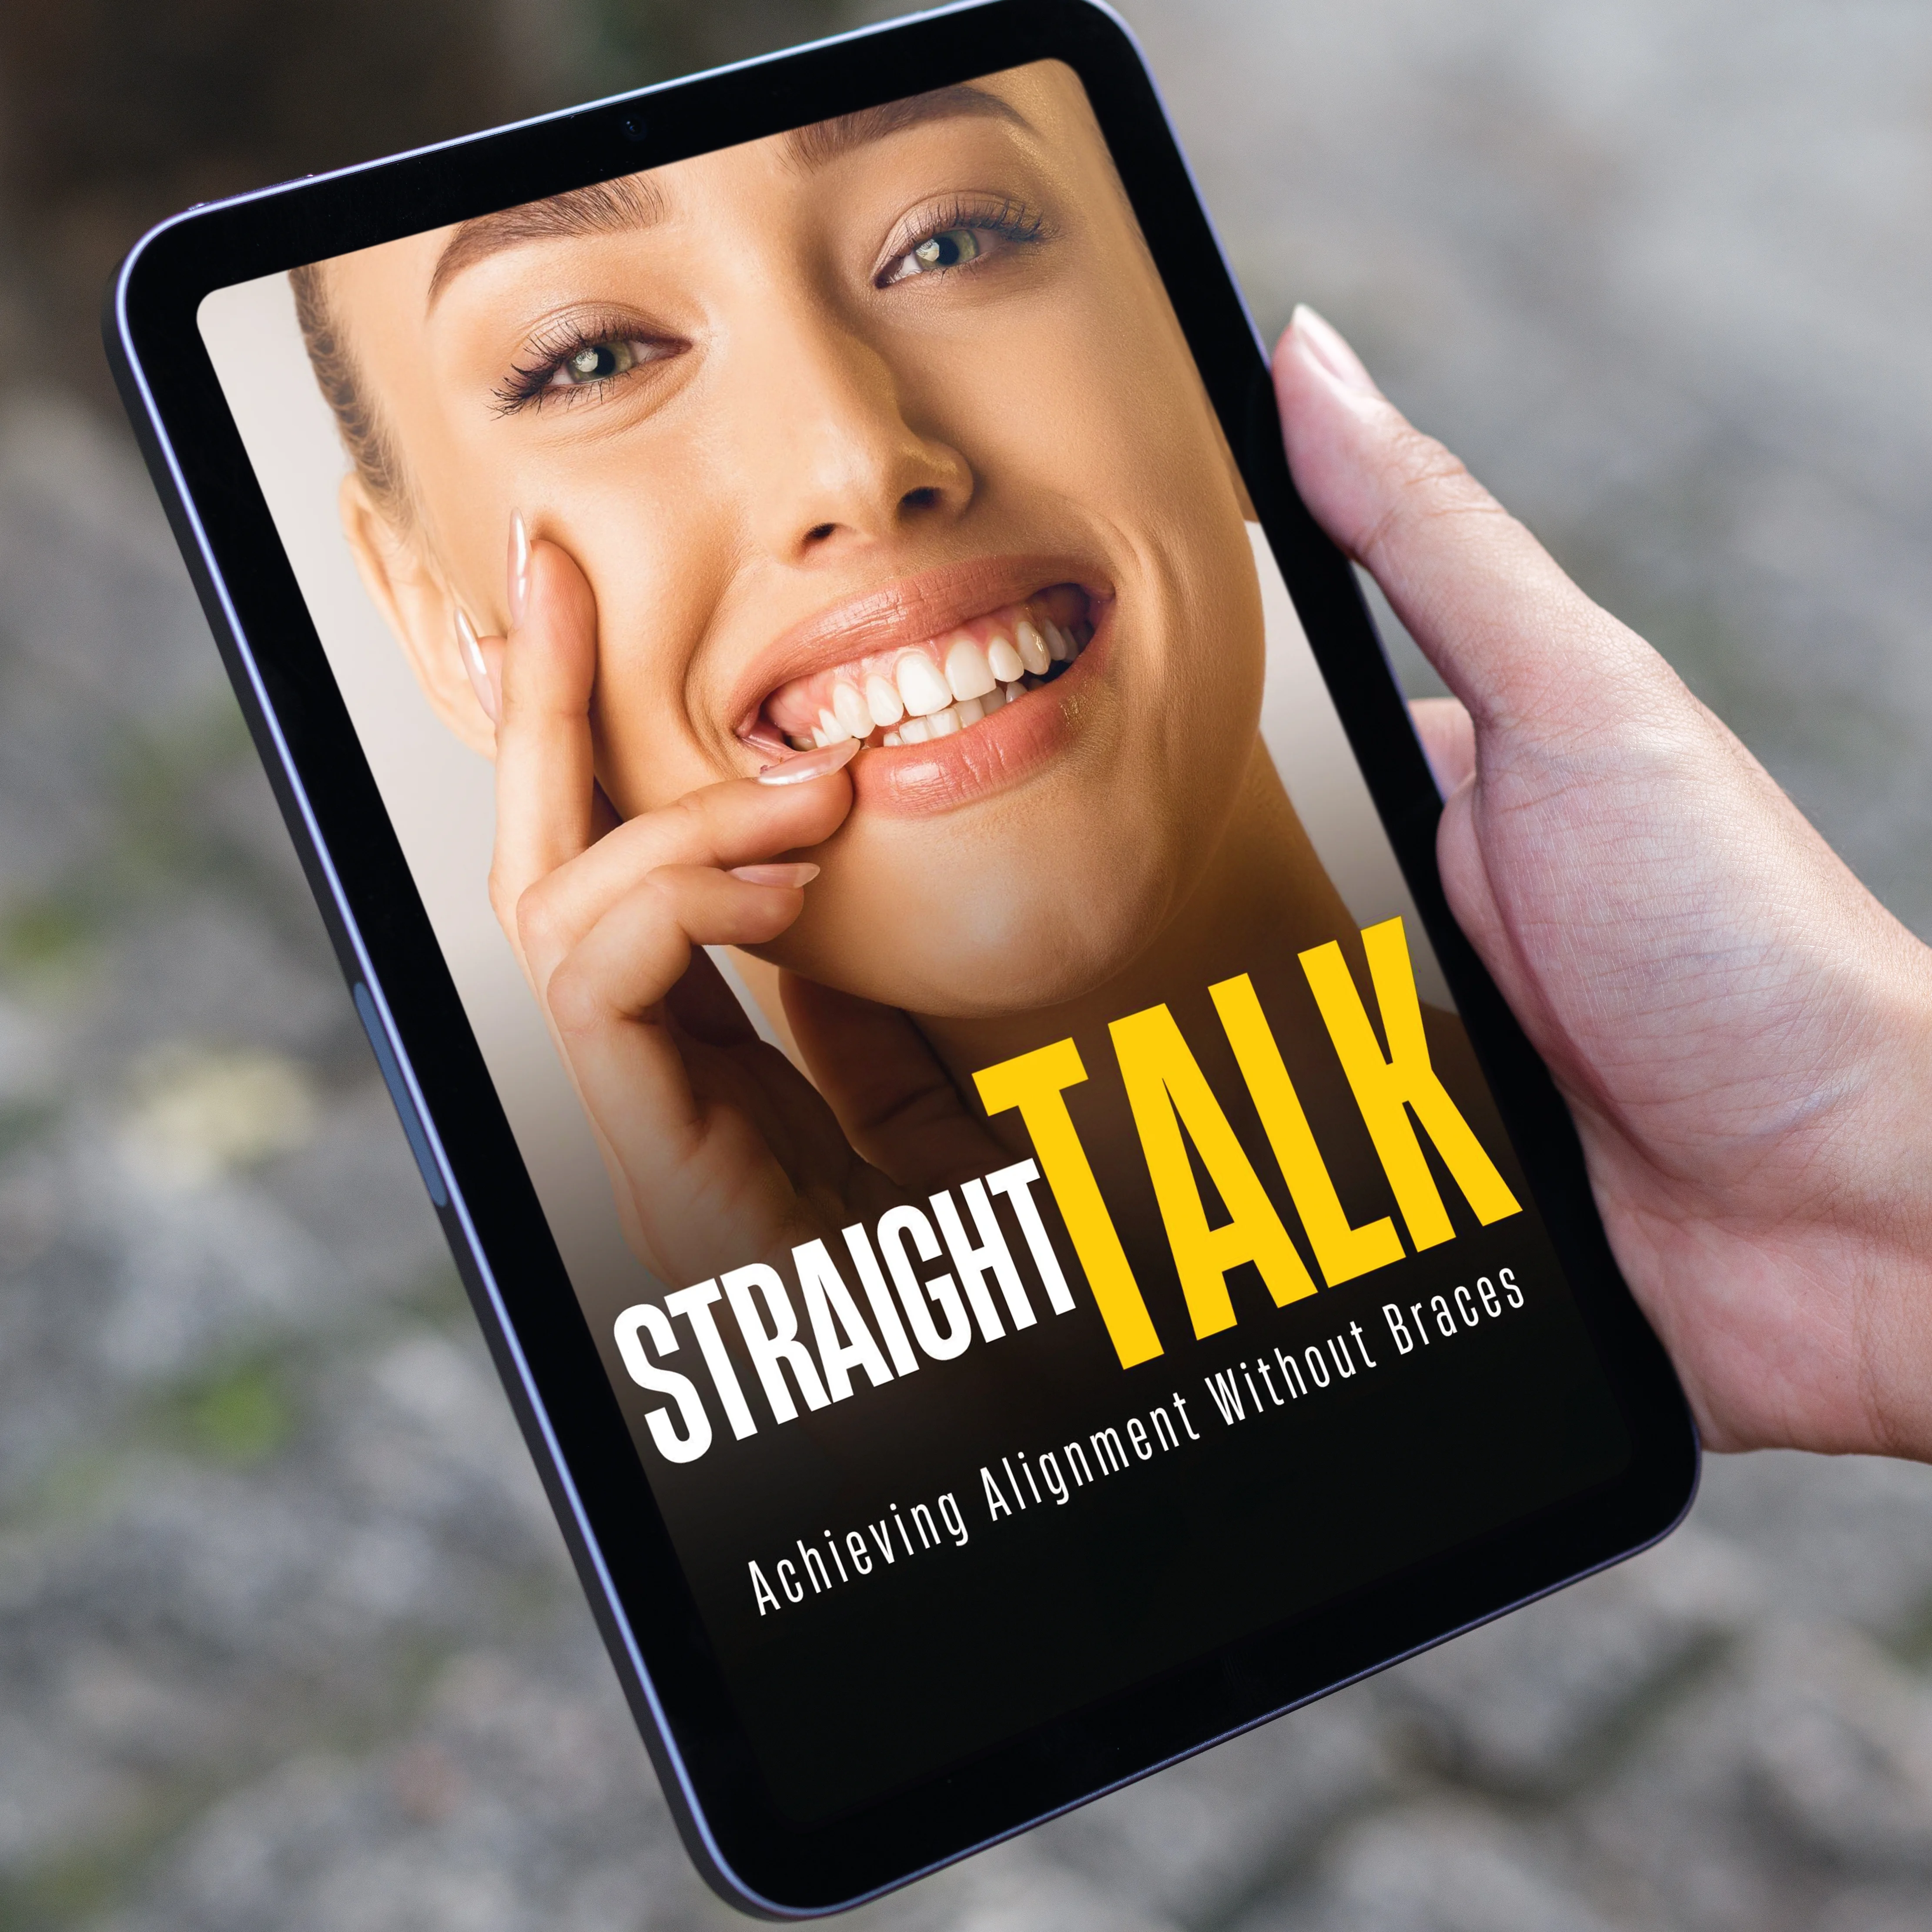 Straight Talk: Achieving Alignment Without Braces